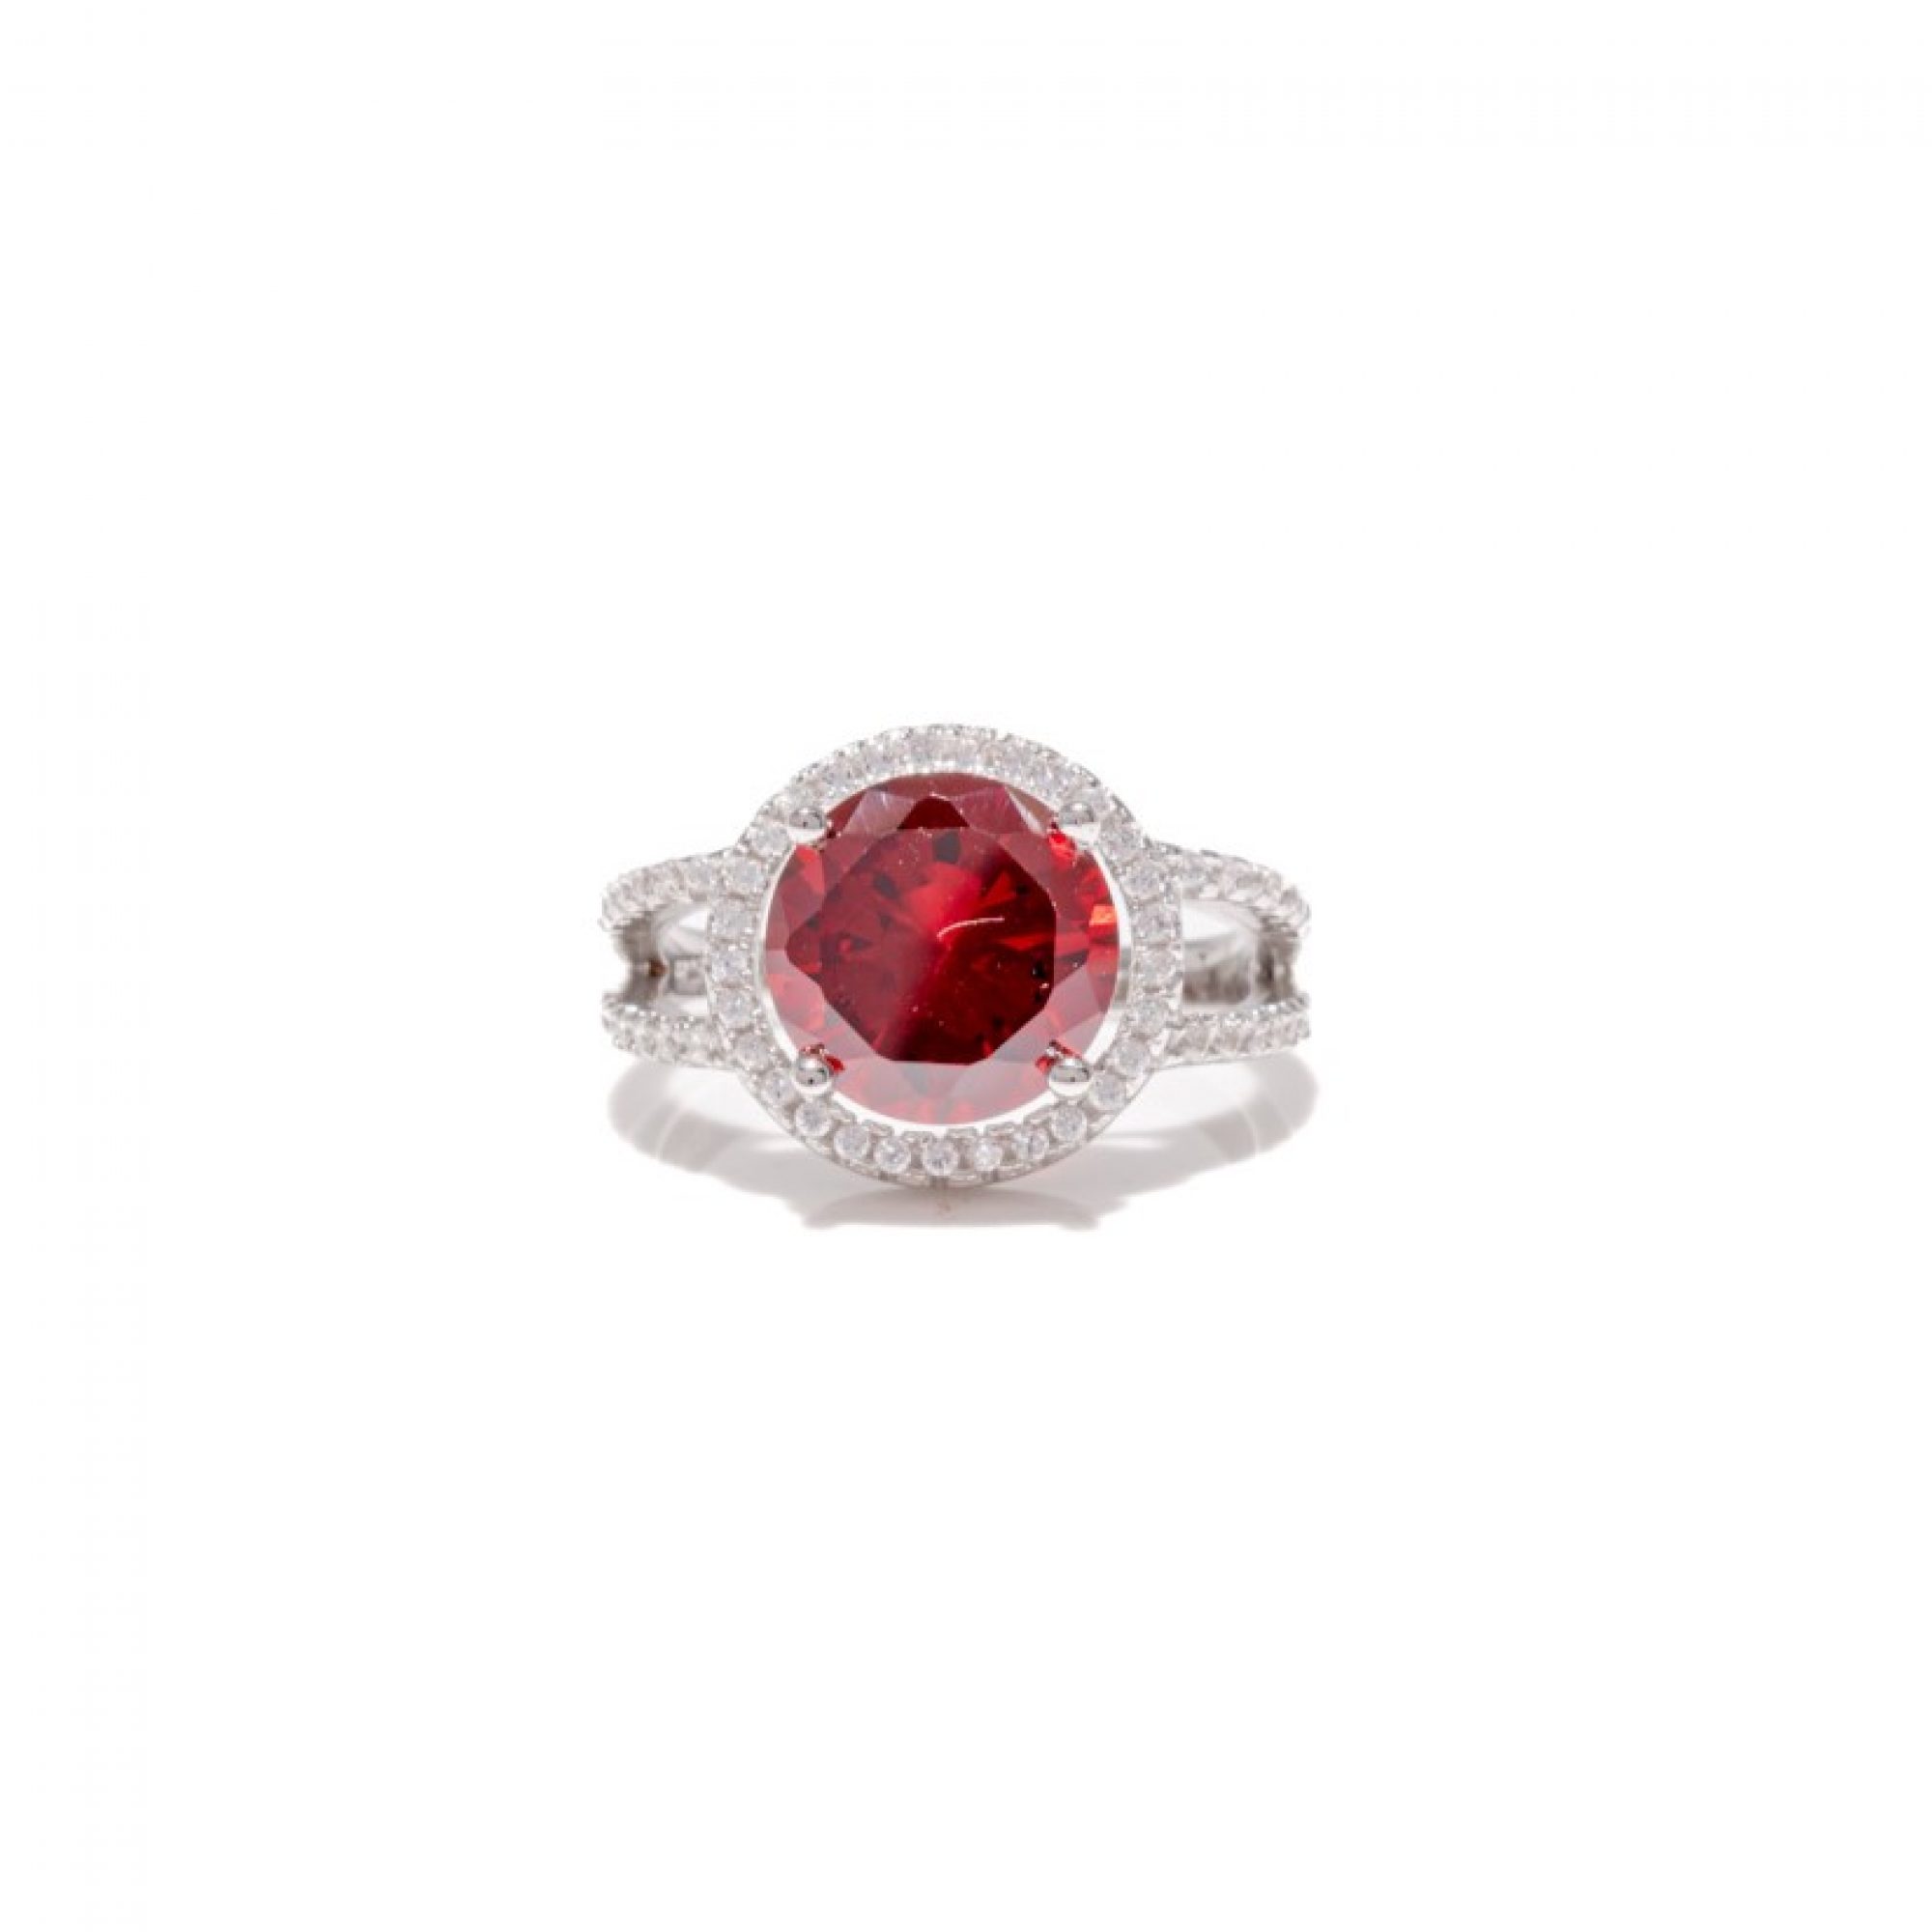 Ring with ruby and zircon stones